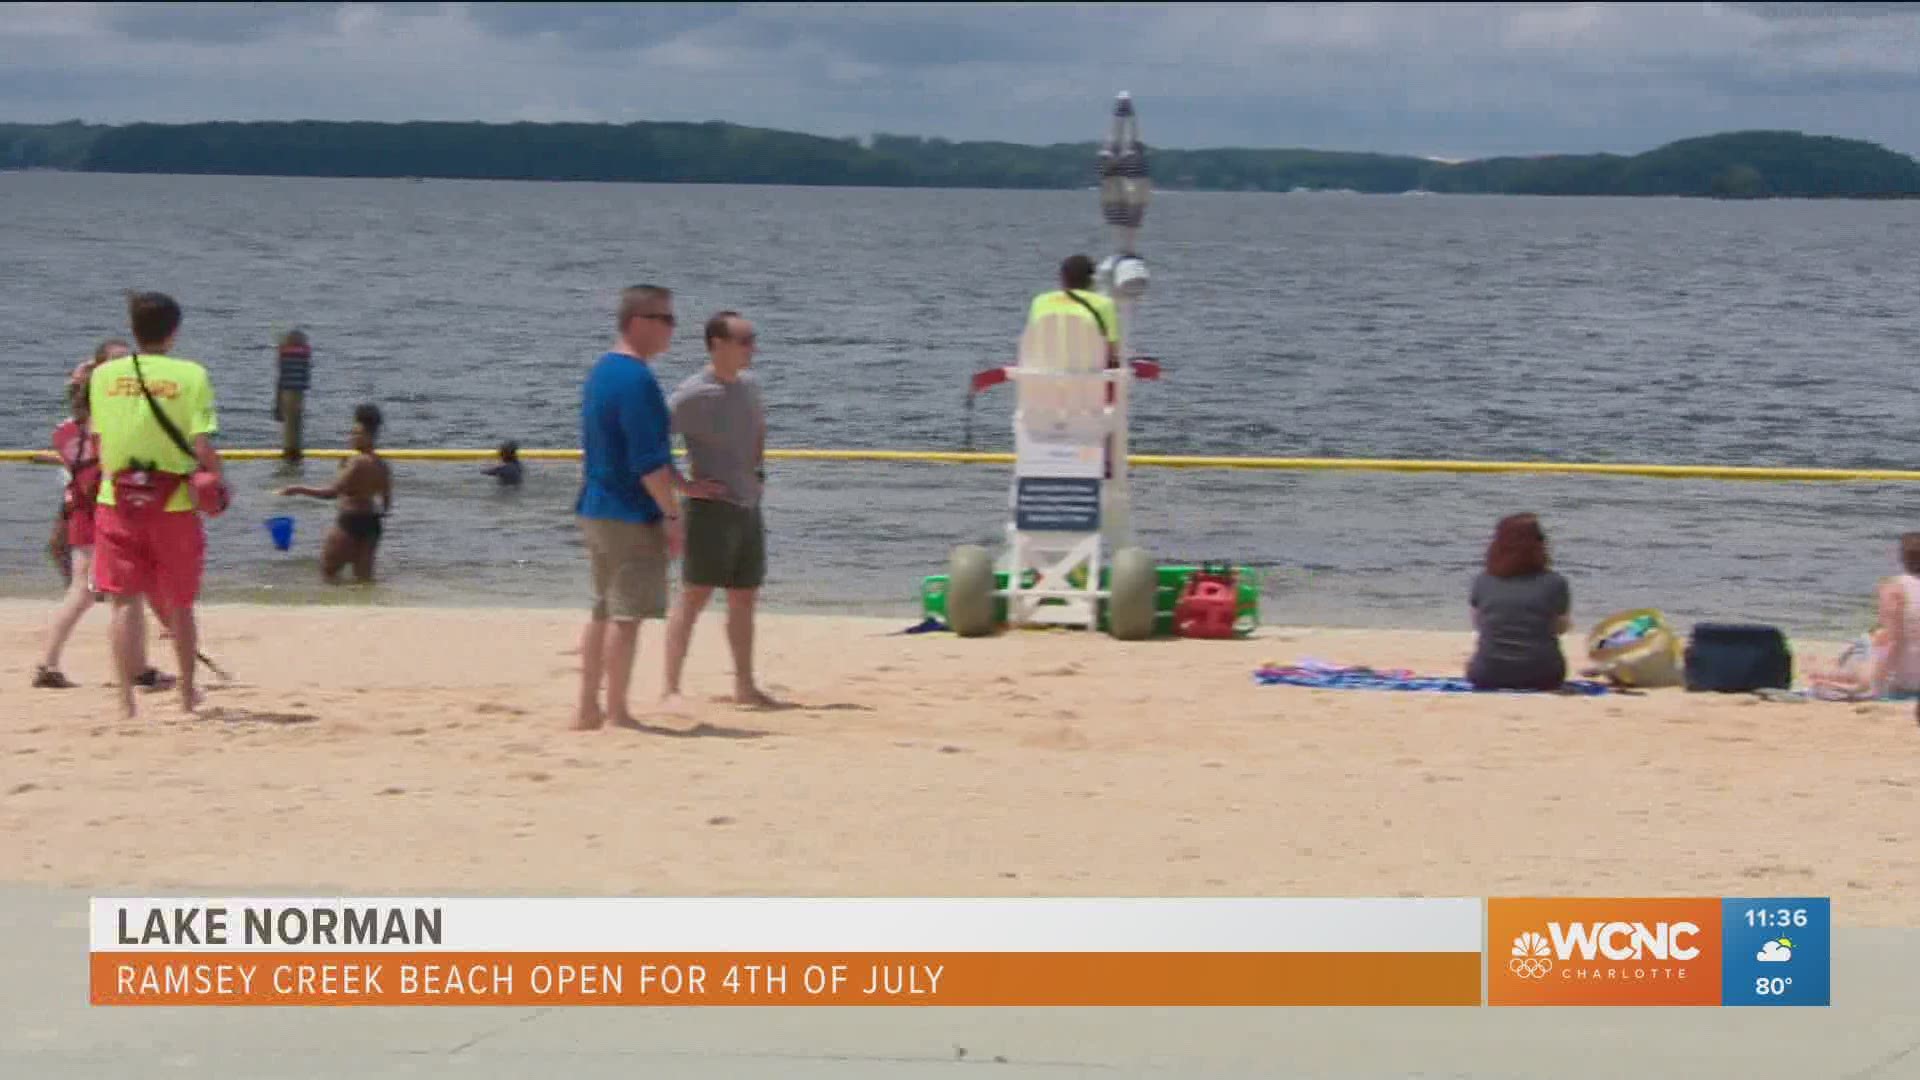 Ramsey Creek Beach on Lake Norman will open for the Fourth of July holiday, Mecklenburg County officials announced.